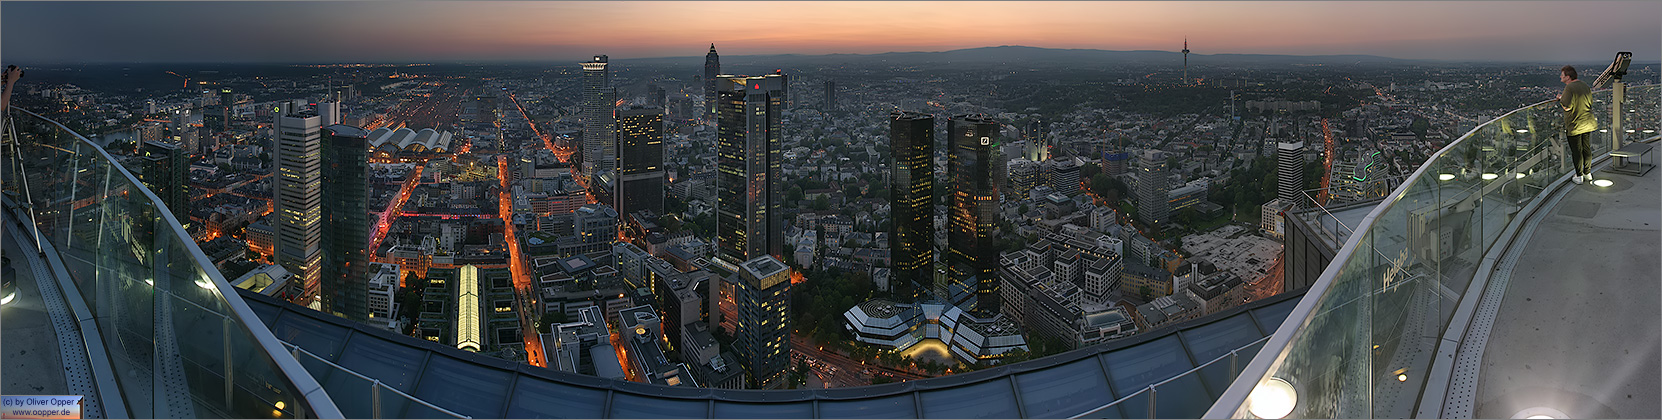 Panorama Frankfurt - Maintower - p079 - (c) by Oliver Opper